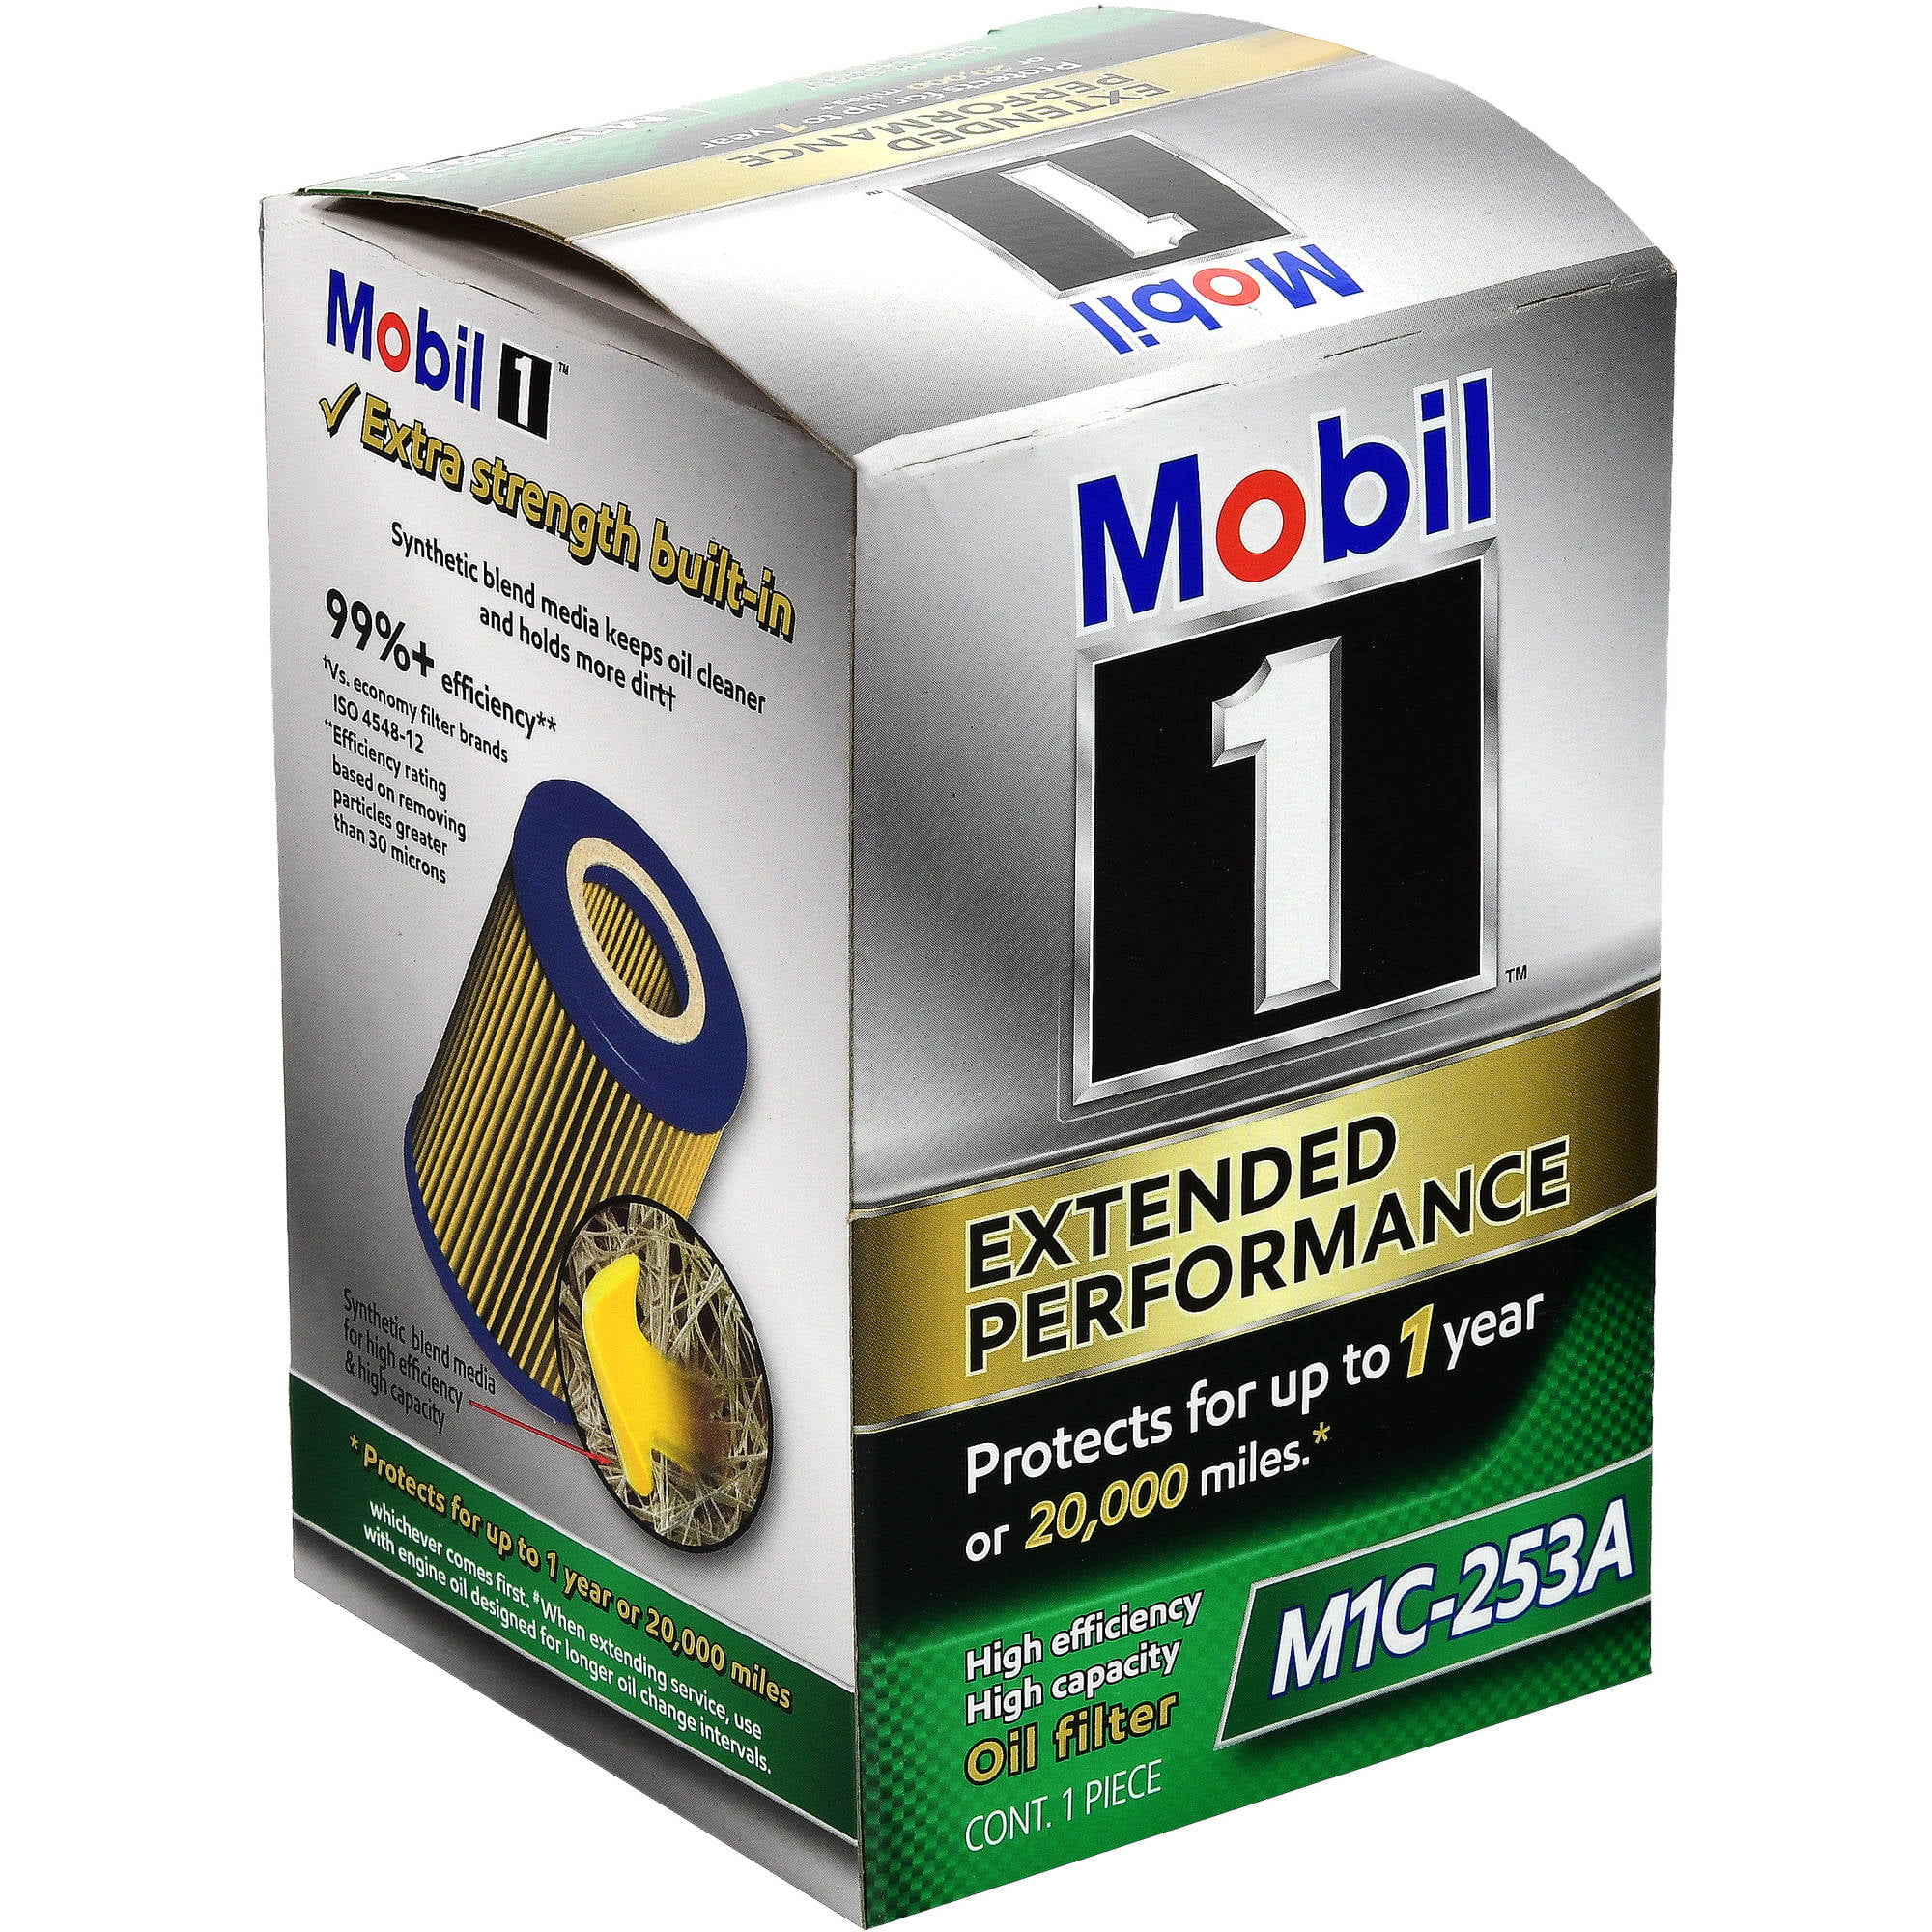 Are Mobil 1 Oil Filters Good